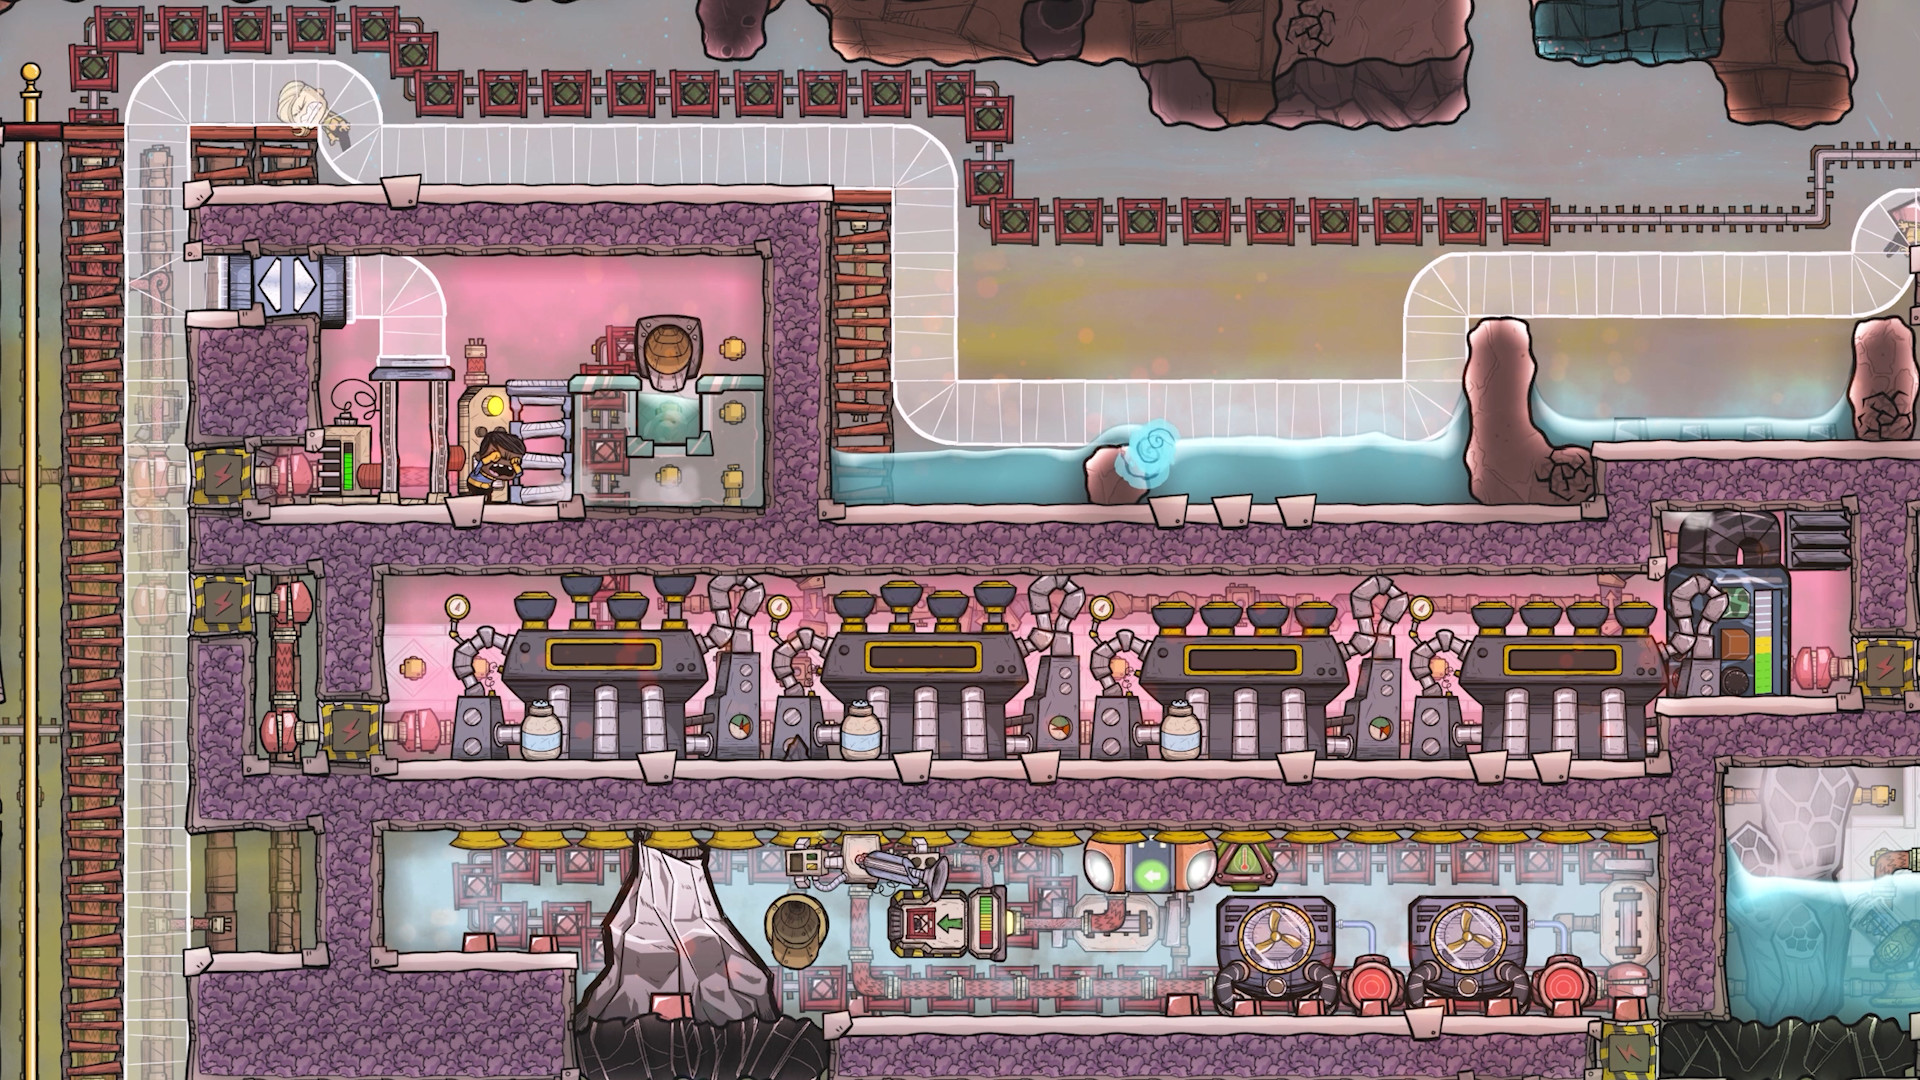 Oxygen Not Included - Spaced Out! Free Download for PC